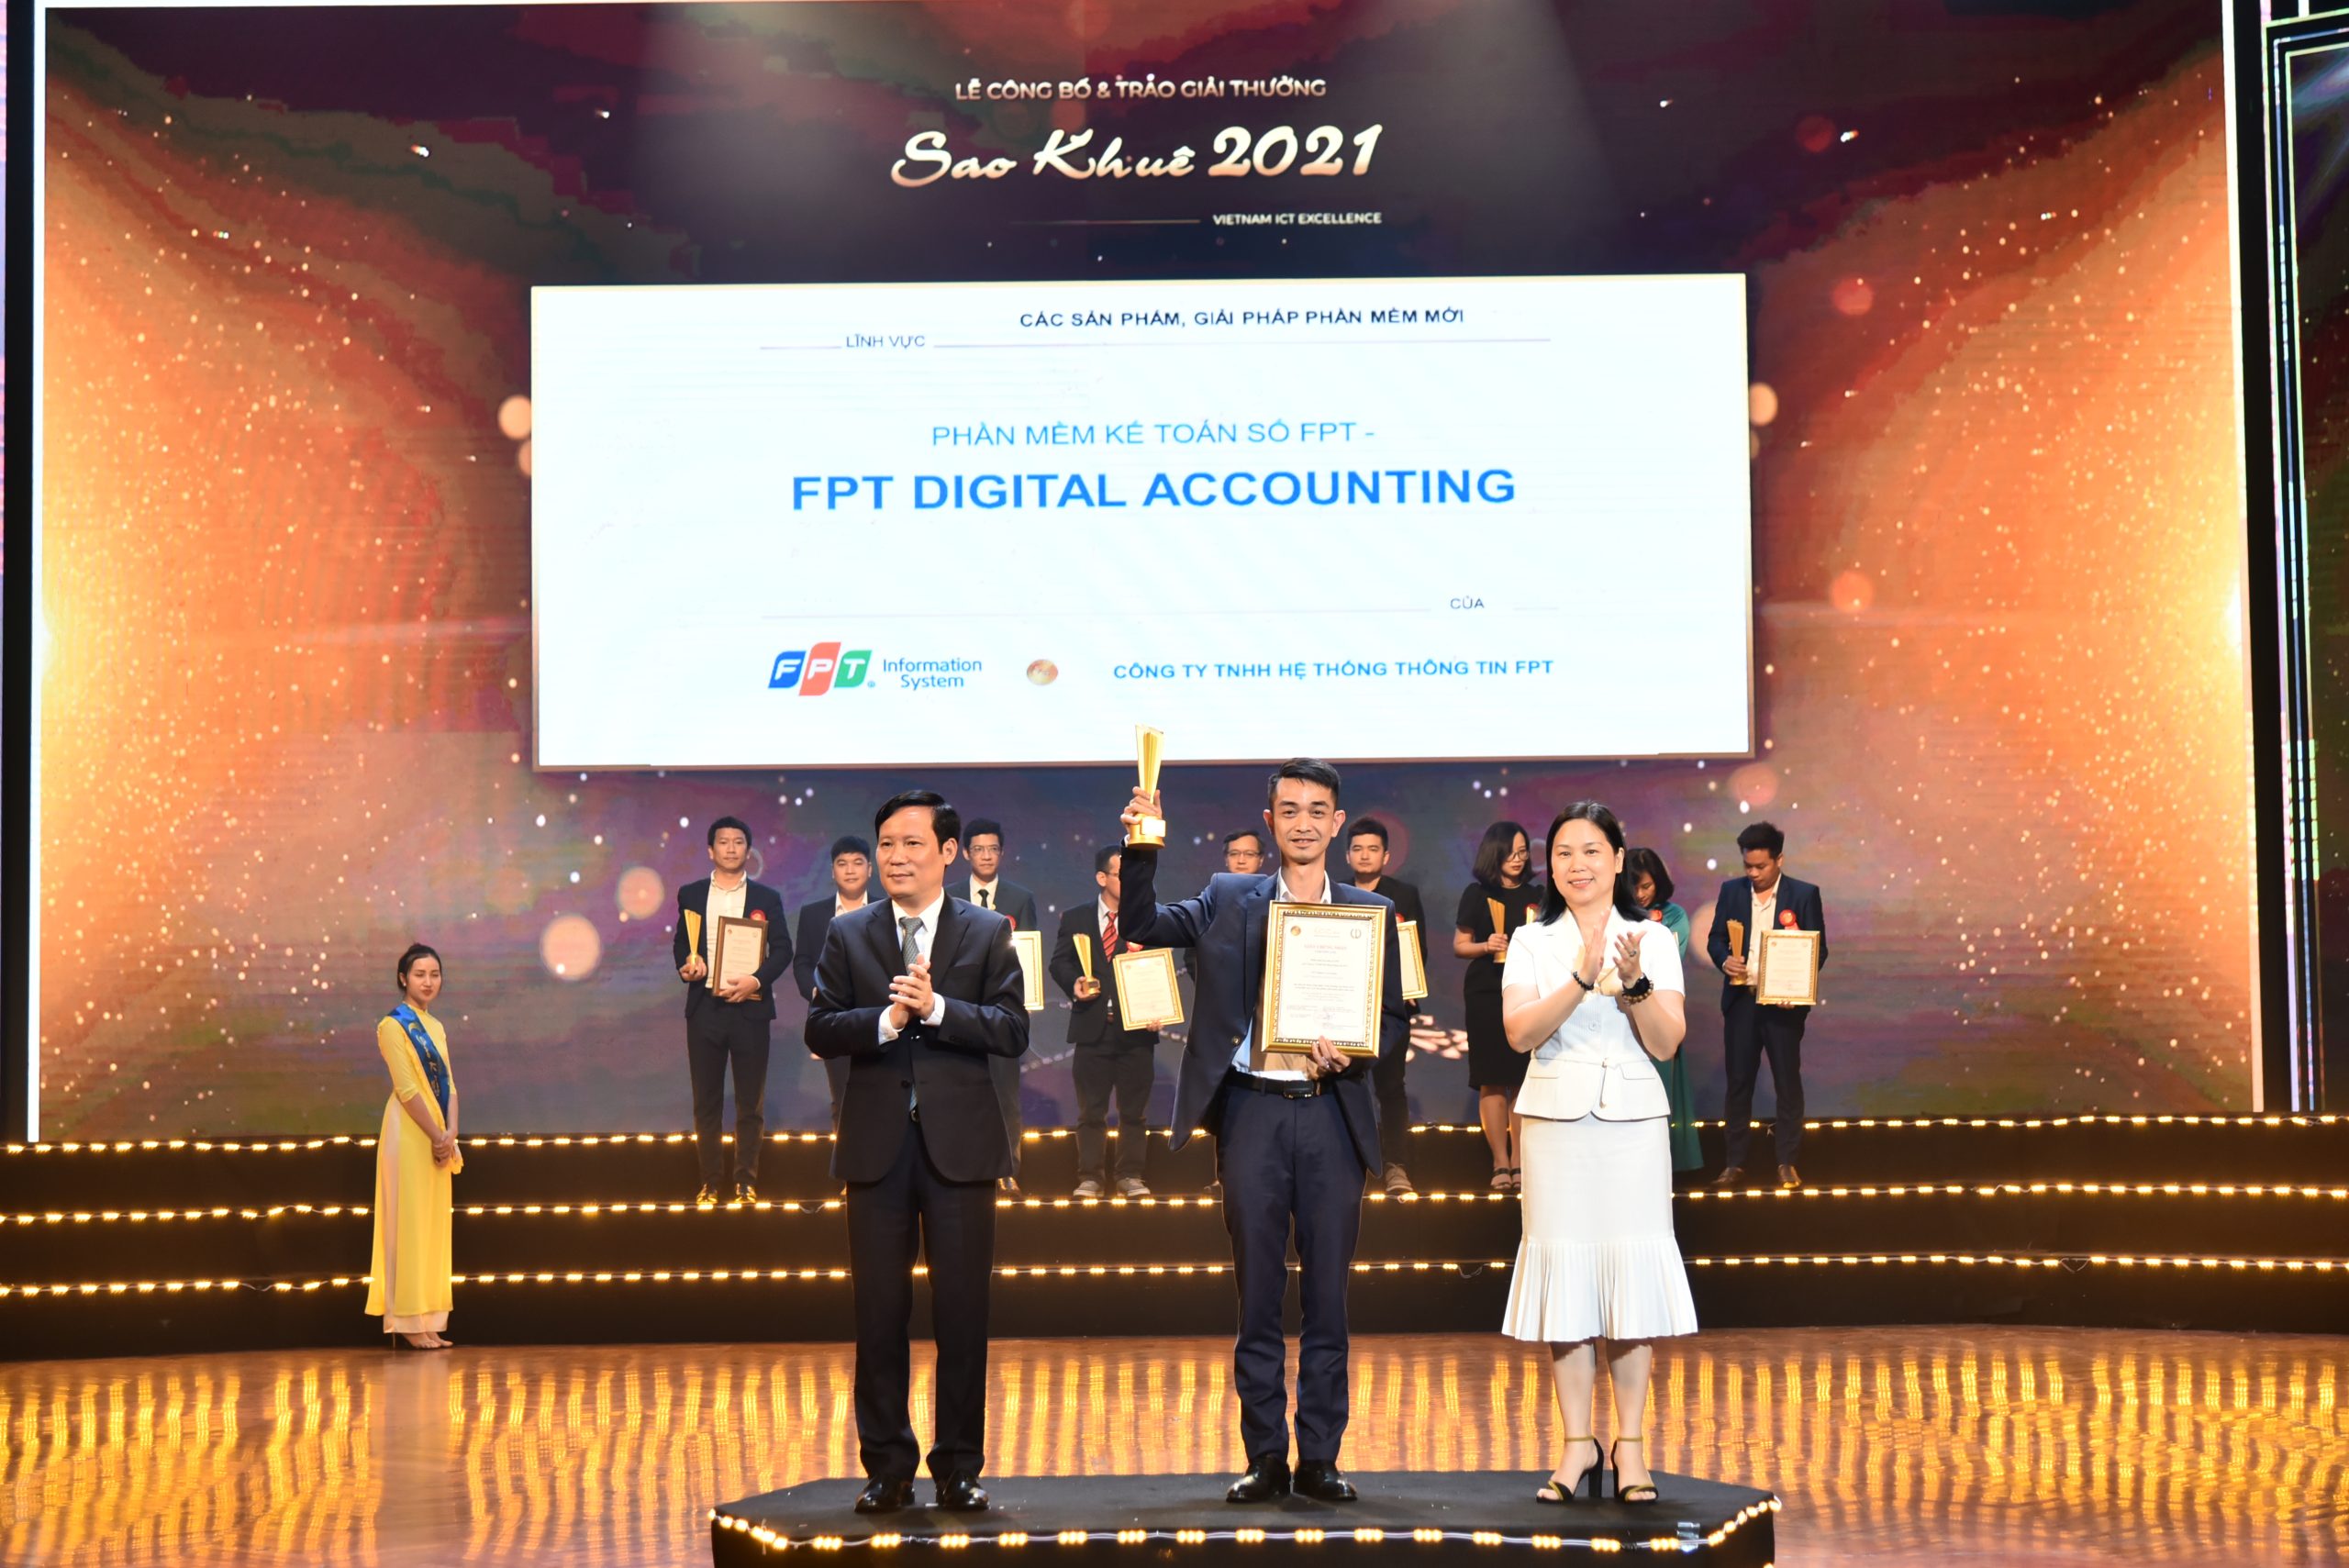 2021 Sao Khue Awards (Vietnam ICT Excellence) – FPT Digital Accounting